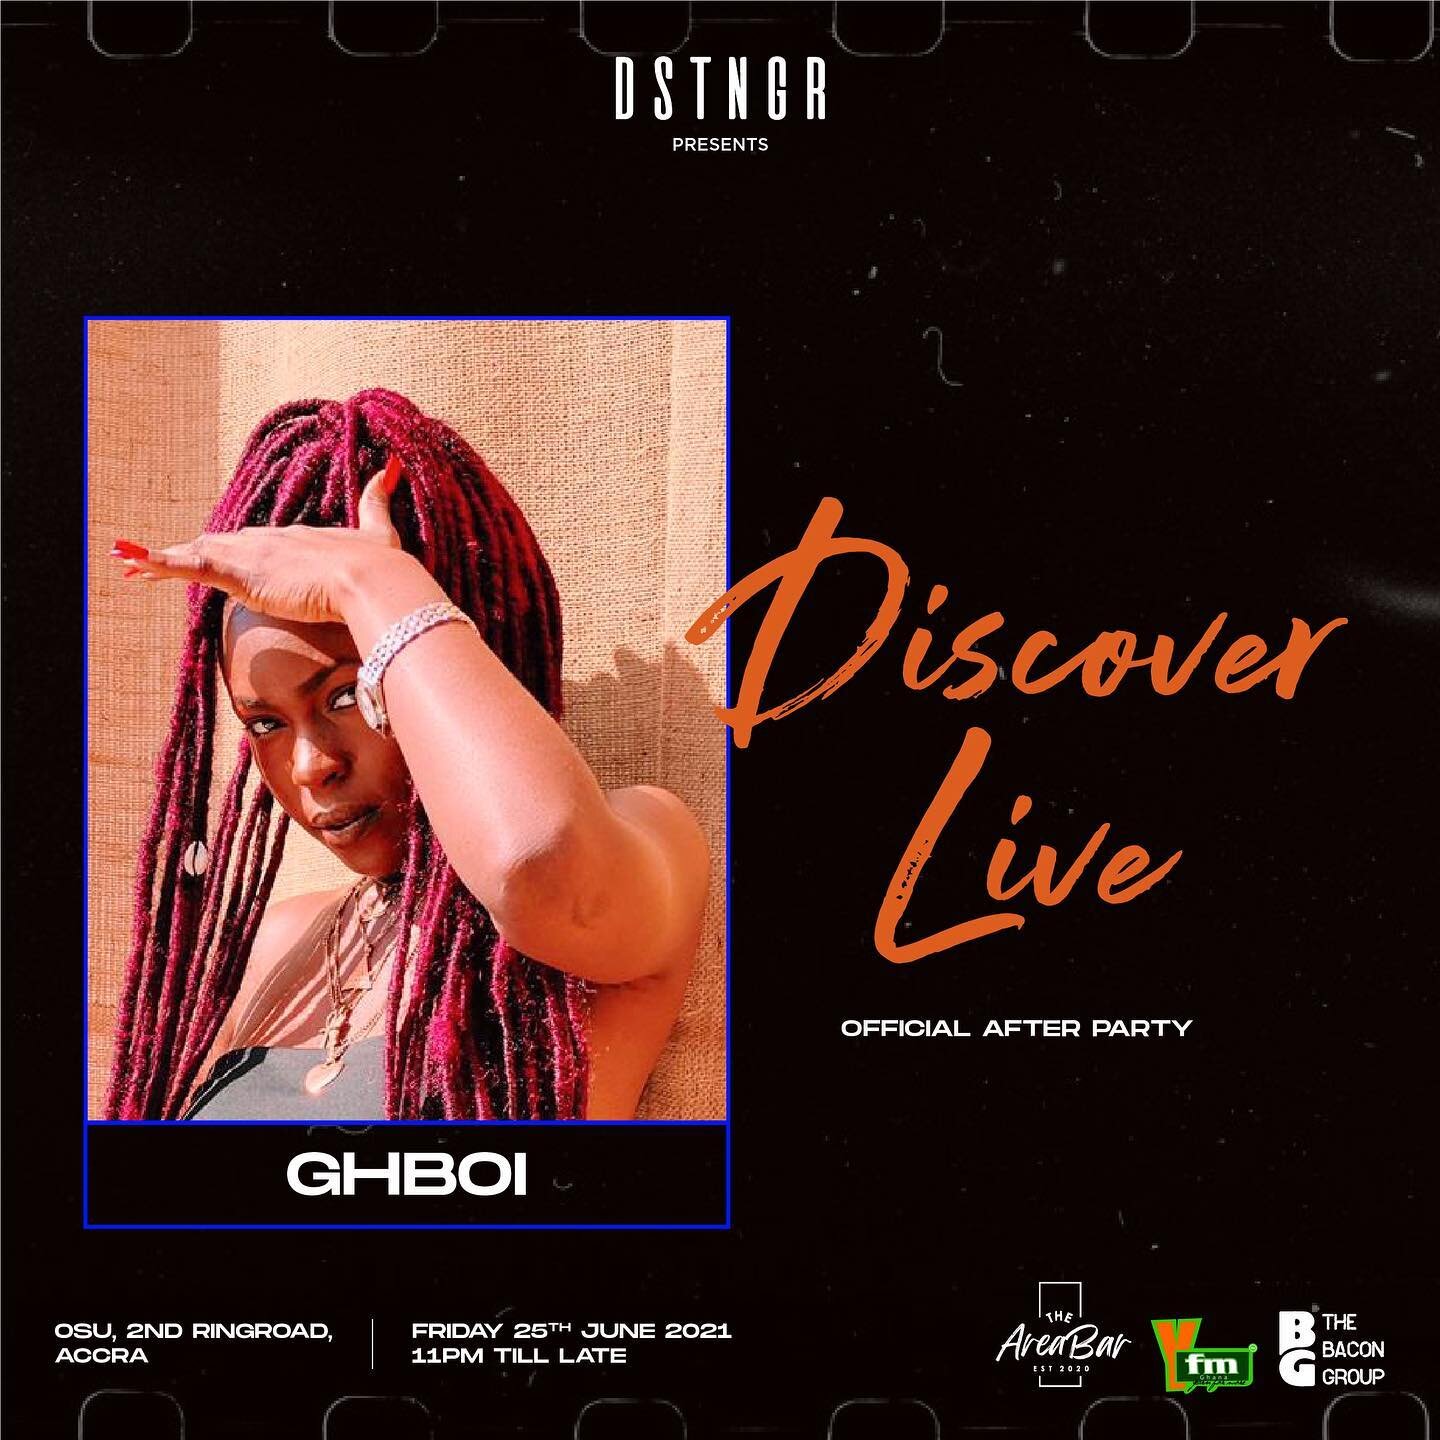 WOW! Discover Live was a movie and now we at @theareabar for the After Party! It&rsquo;s about to go from choked to fully choked with @djmenz49 @templegramme and the beautiful @djghboi!

#dstngr #music #livemusic #liveband #afterparty #areabar #ghana